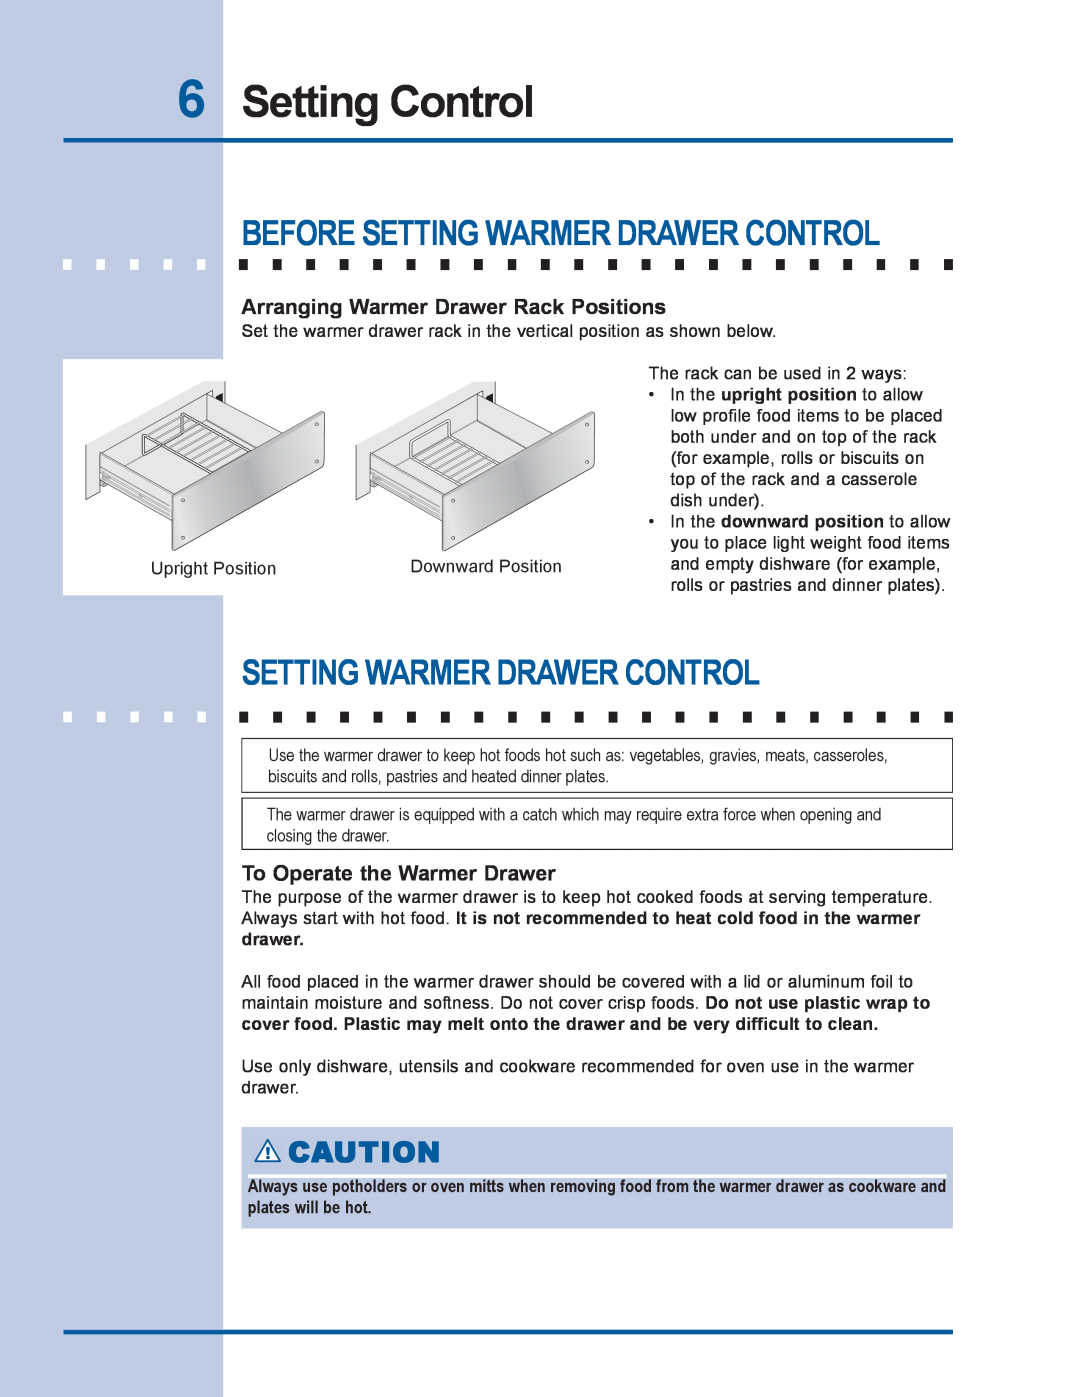 Electrolux 318 201 016 manual Setting Control, Before Setting Warmer Drawer Control, Arranging Warmer Drawer Rack Positions 